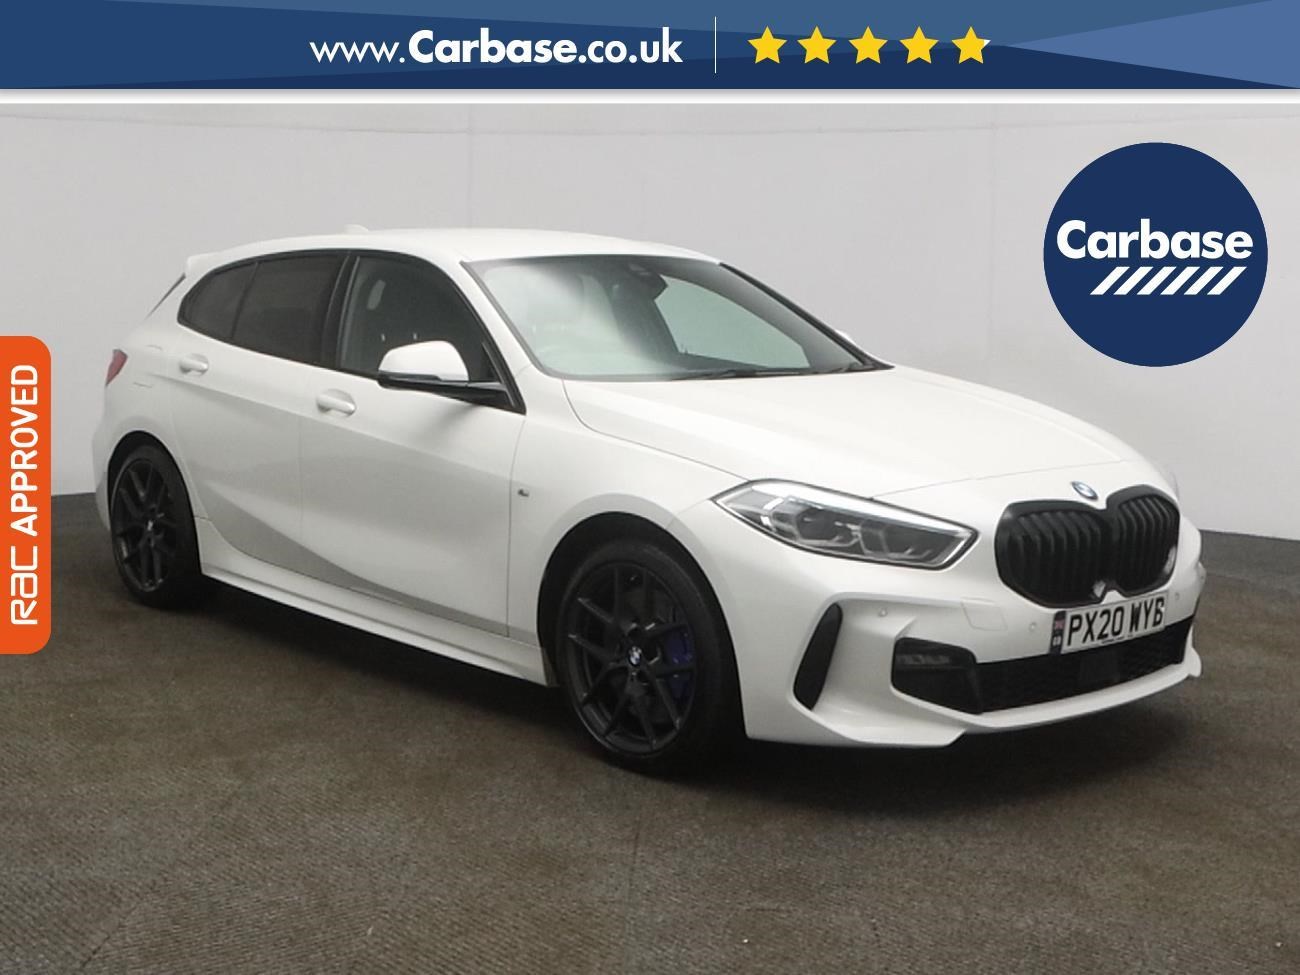 Used BMW for Sale Bristol, Find PCP Finance on Nearly New BMW Today